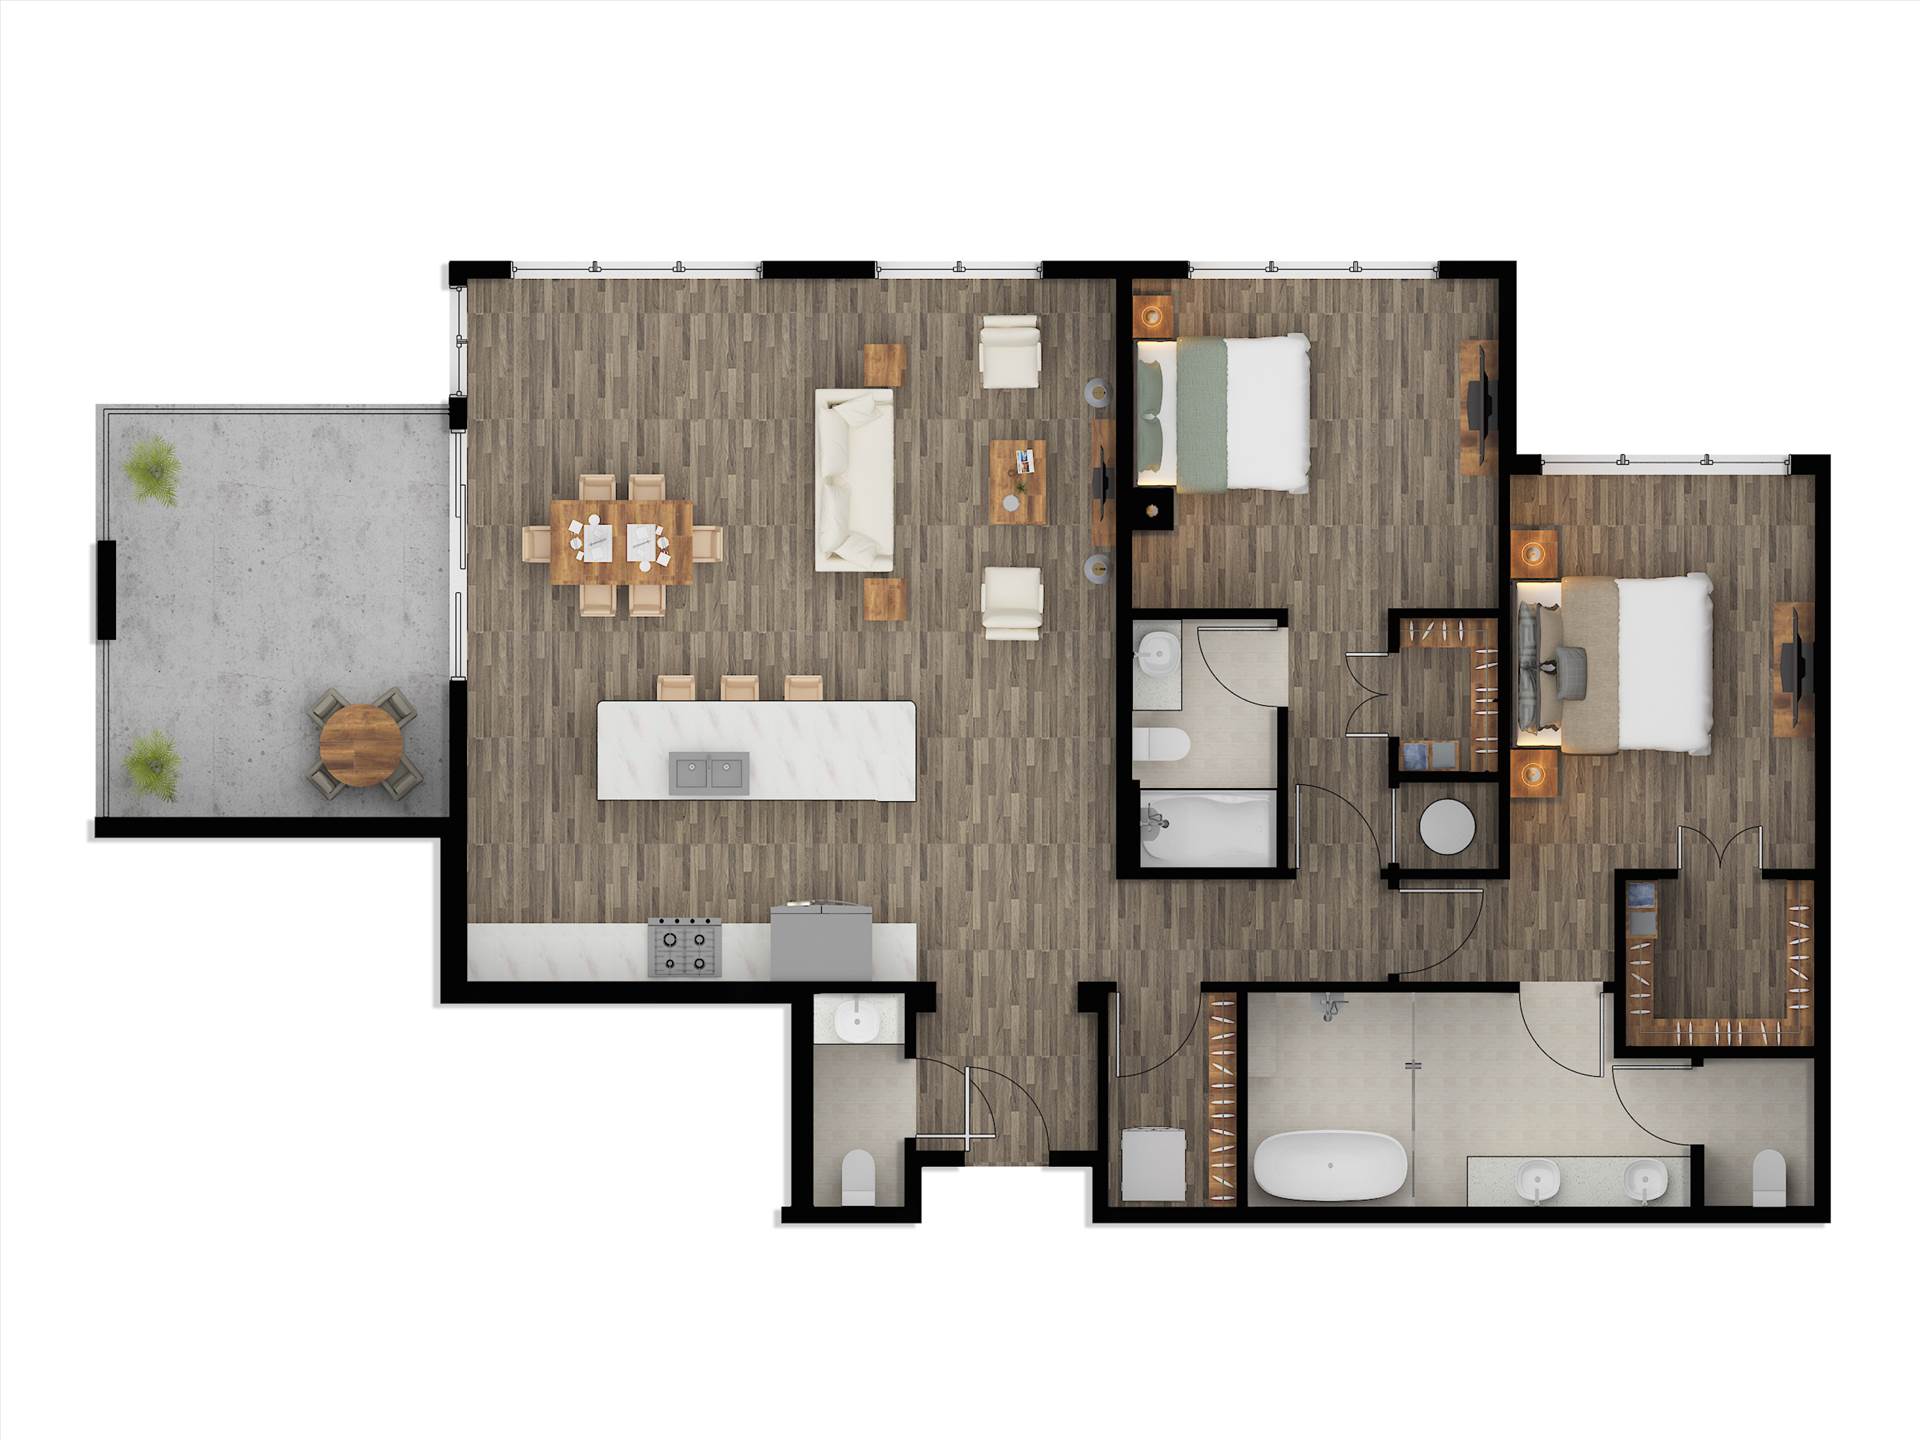 2D Color Floor Plan Rendering Los Angeles 3D Rendering Services in both 2D and 3D Floor Plan Rendering like House floor plans, Building floor plans, office floor plan, kitchen floor plan For the client’s choice. We take utmost care of sticking to the dimensions given by our clients. by JMSDCONSULTANT